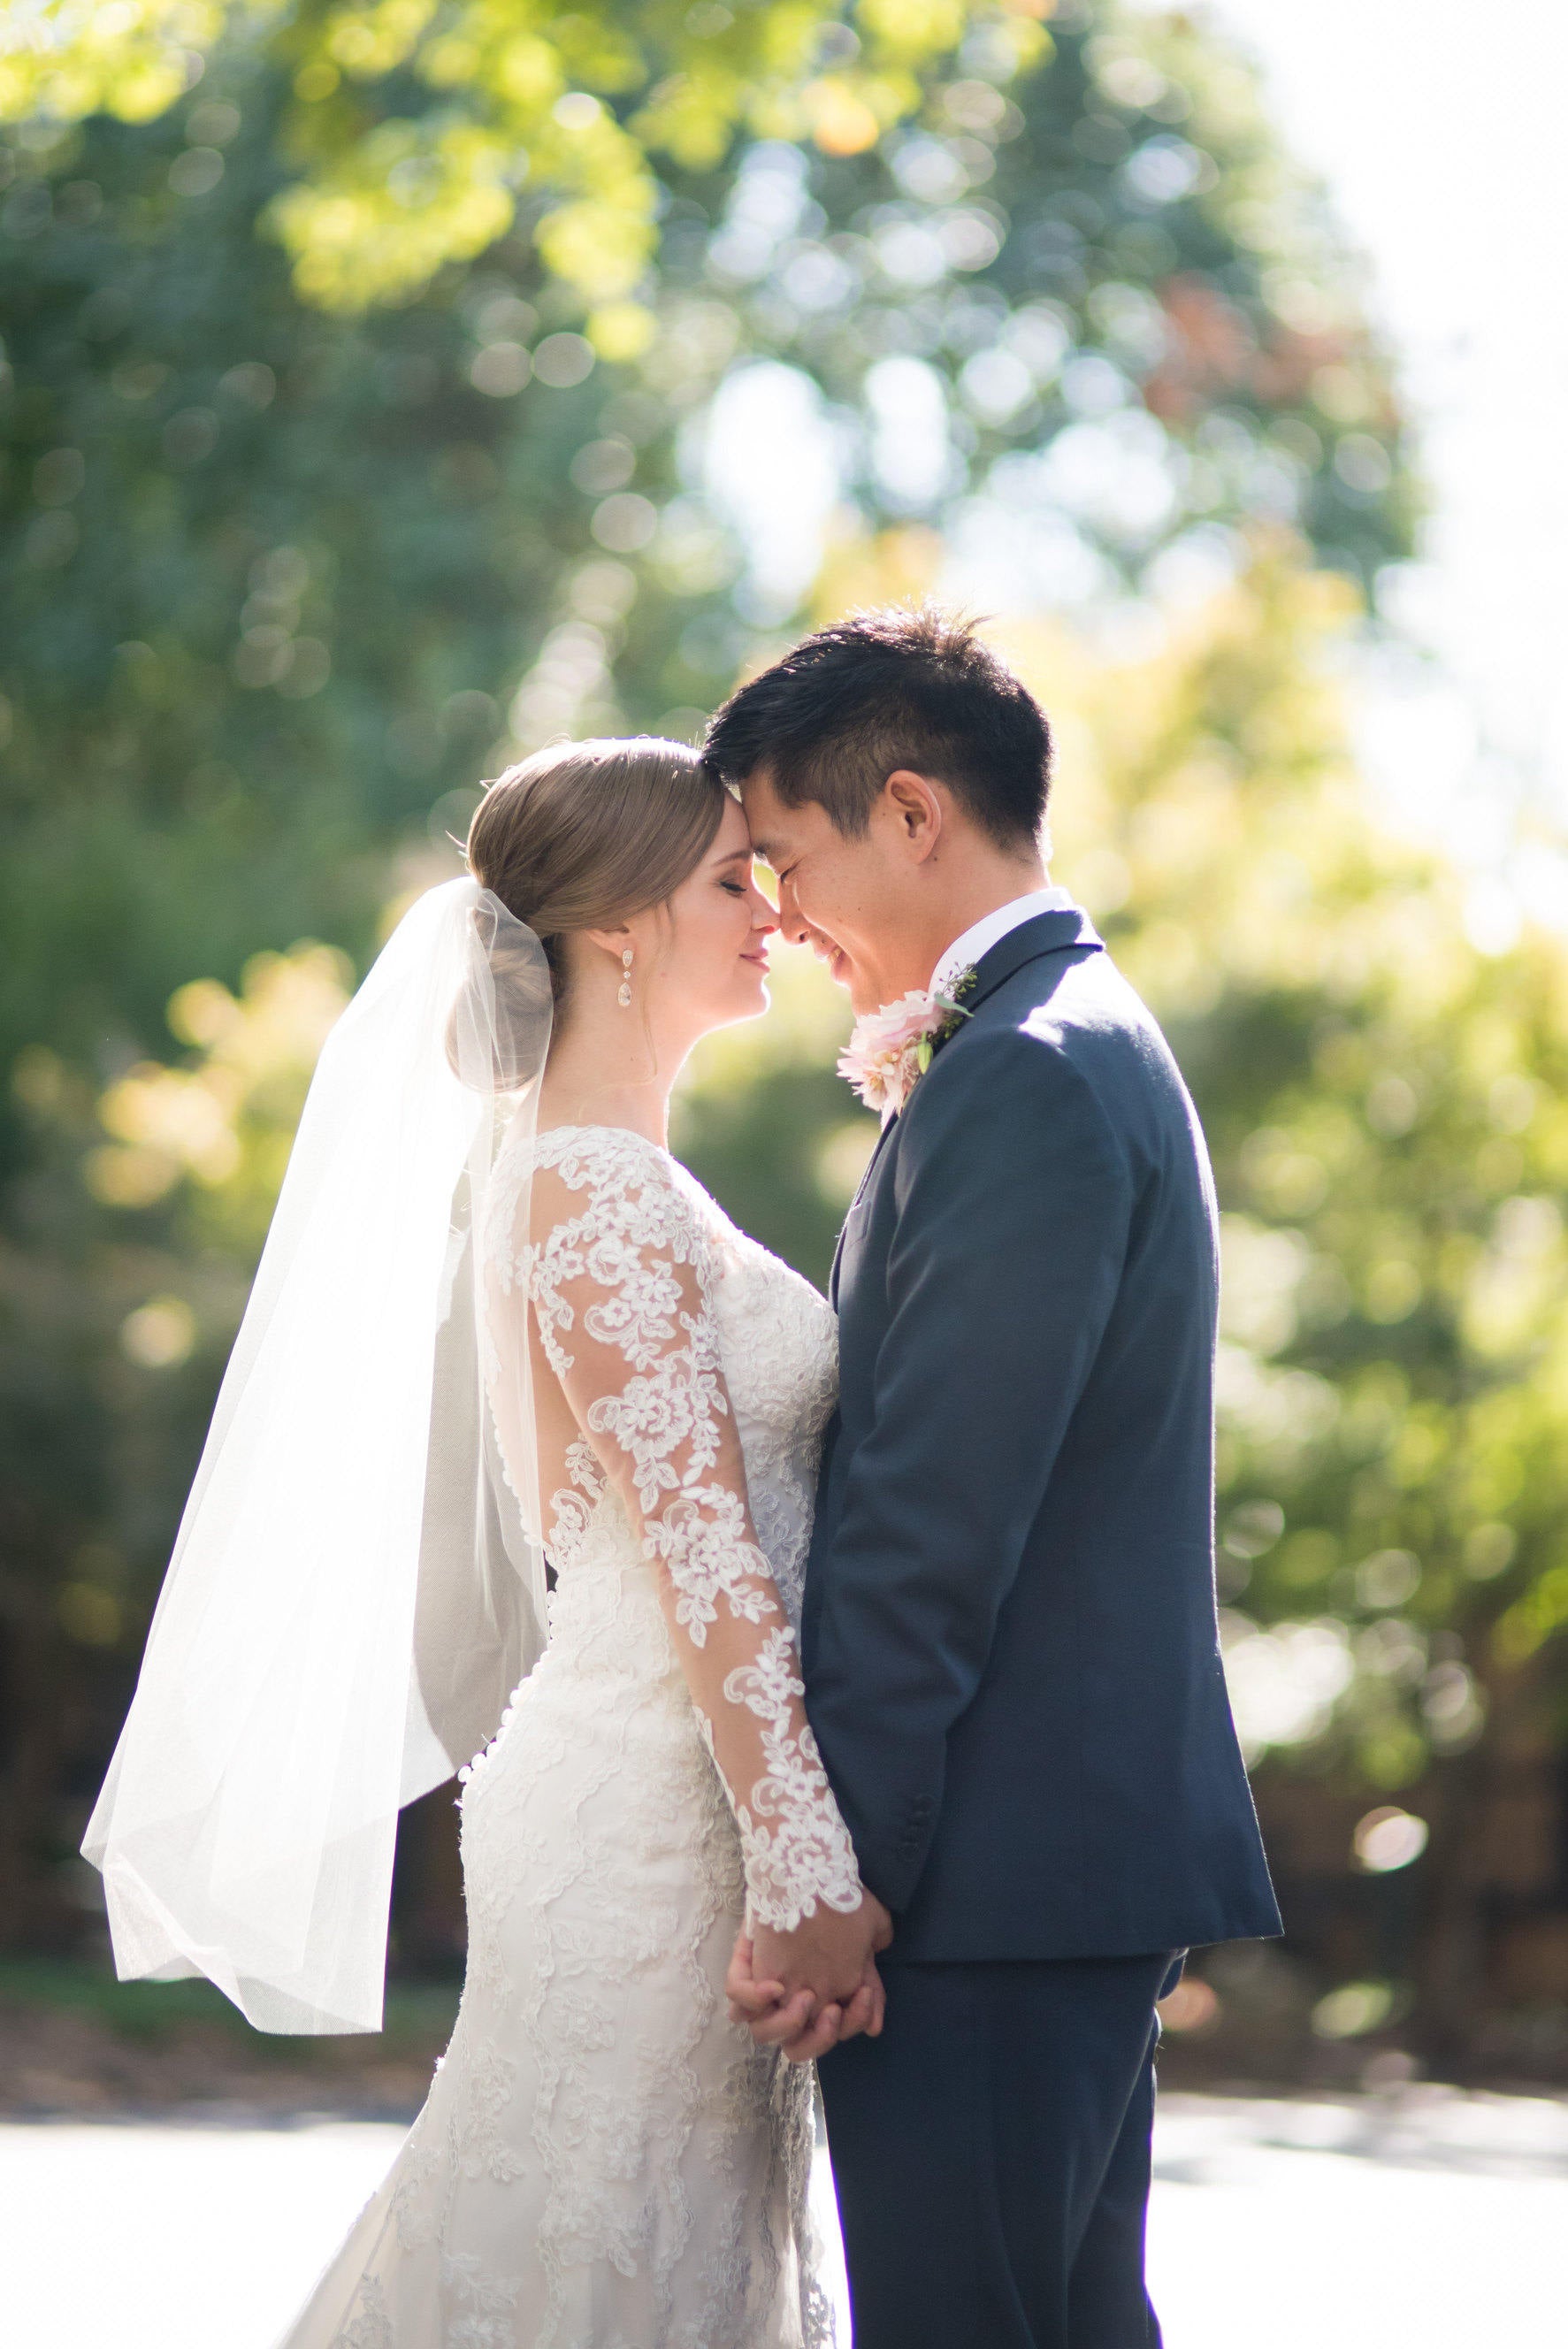 Vintage Rustic Outdoor Wedding: Simple veil and Lace Dress